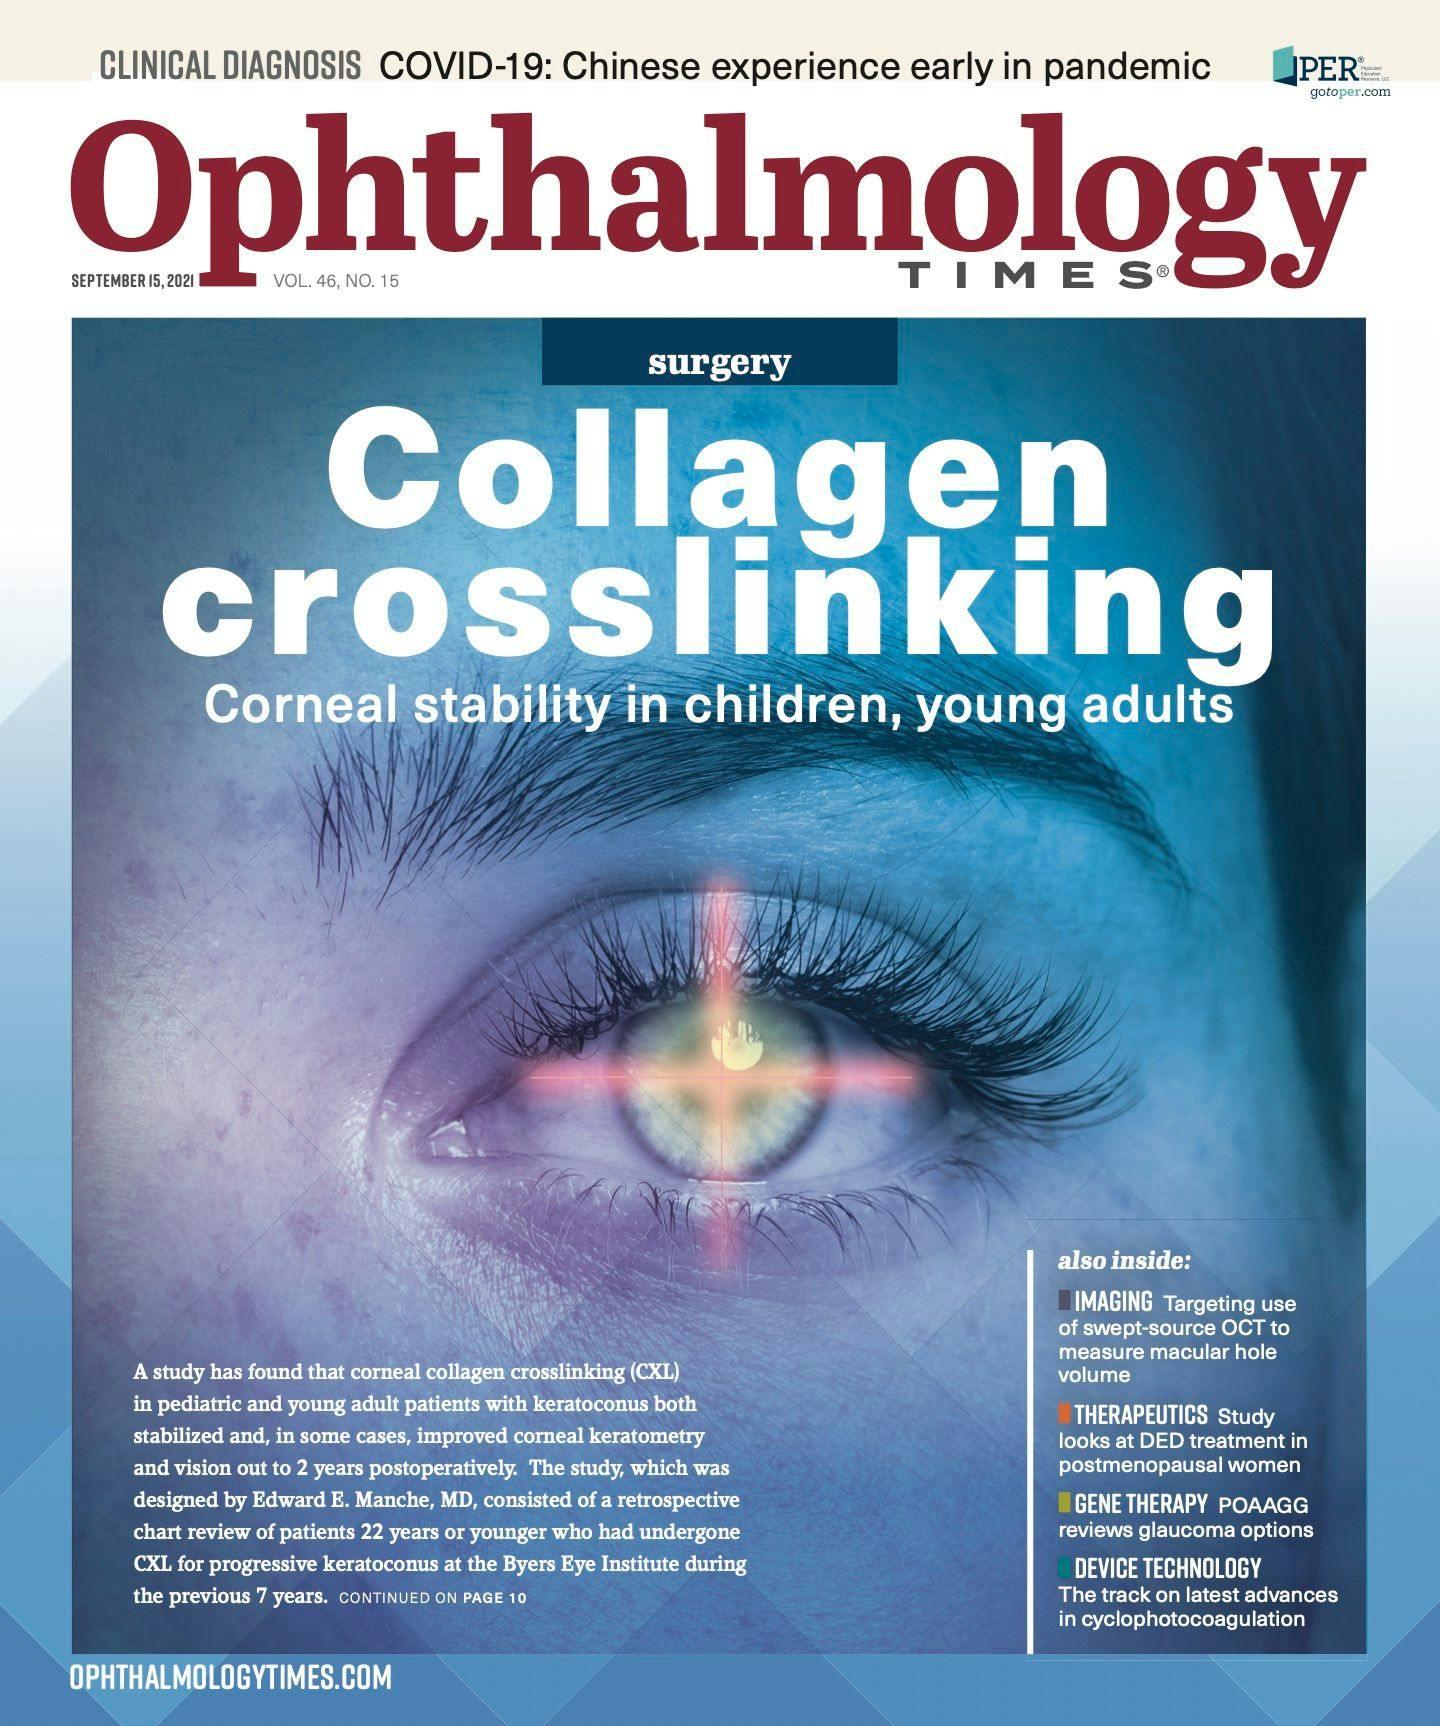 Ophthalmology Times: September 15, 2021